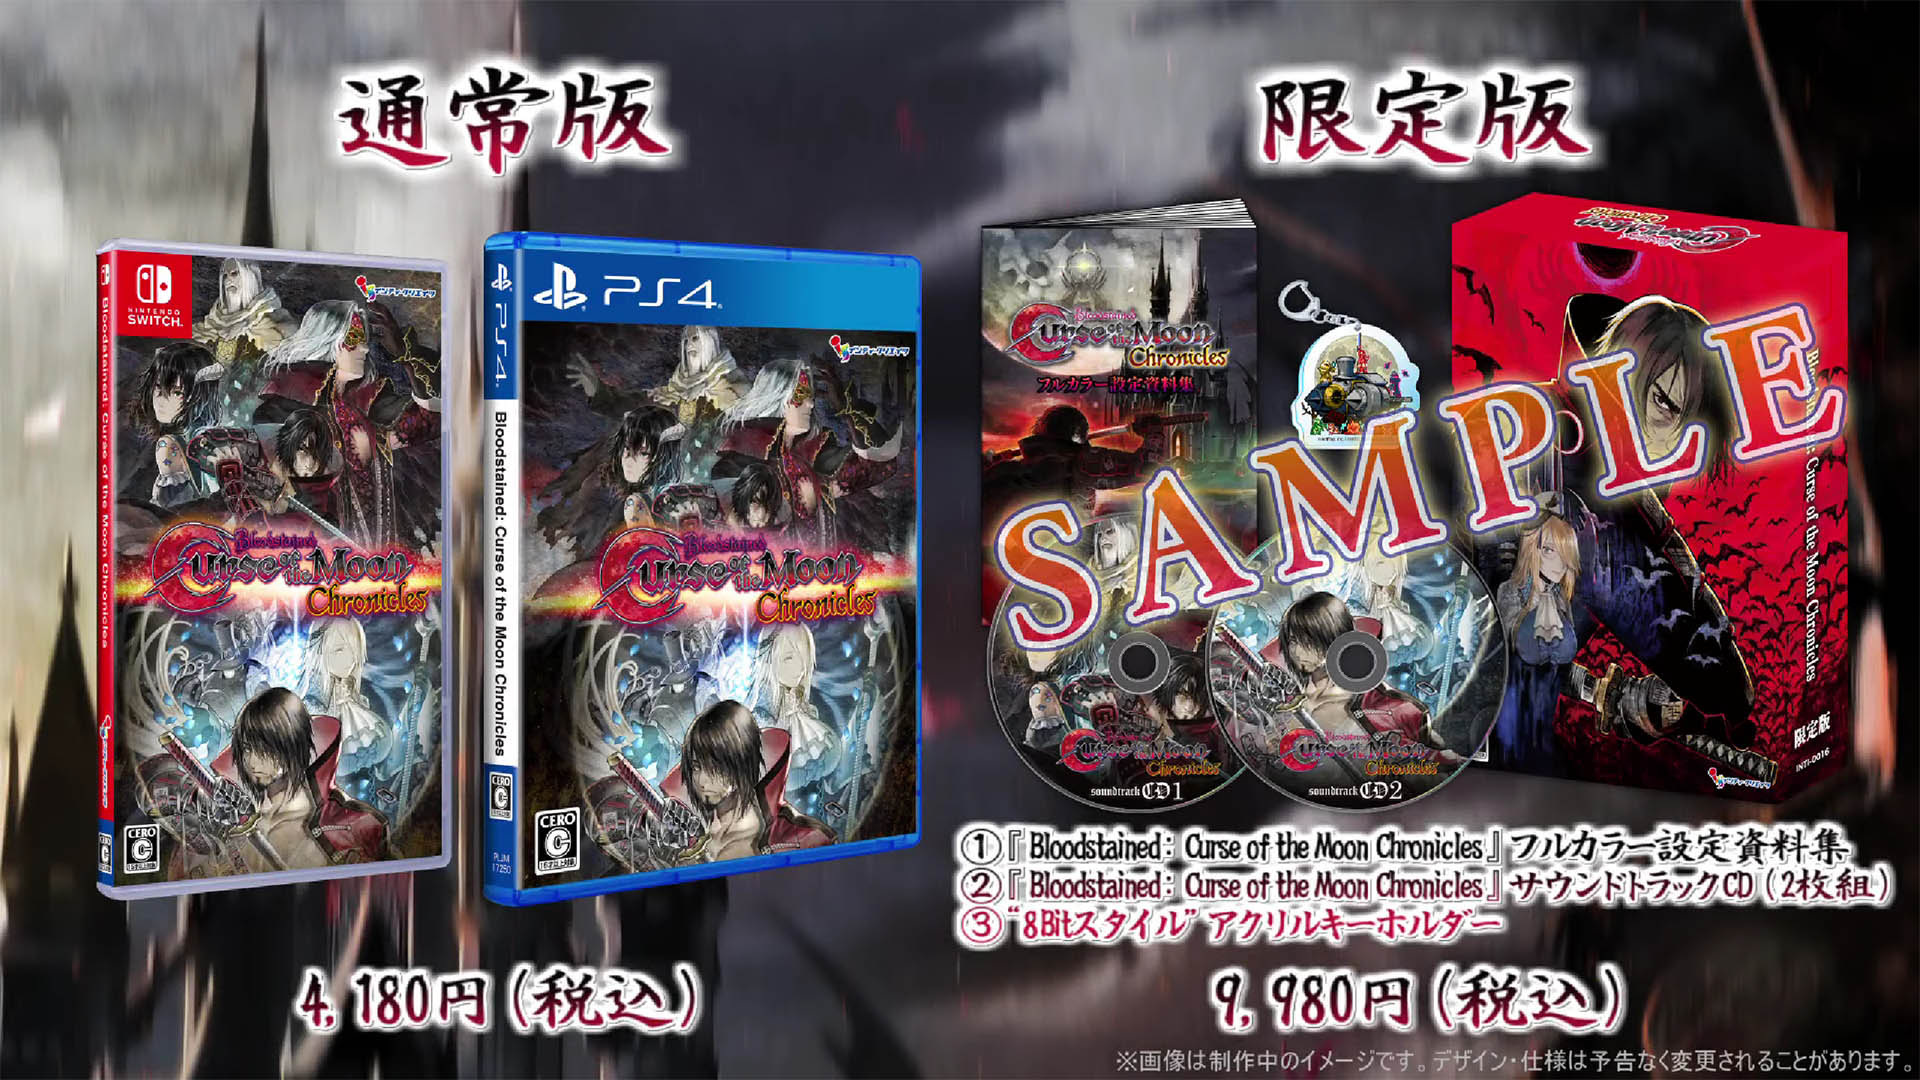 Bloodstained: Curse of the Moon Chronicles double-pack announced